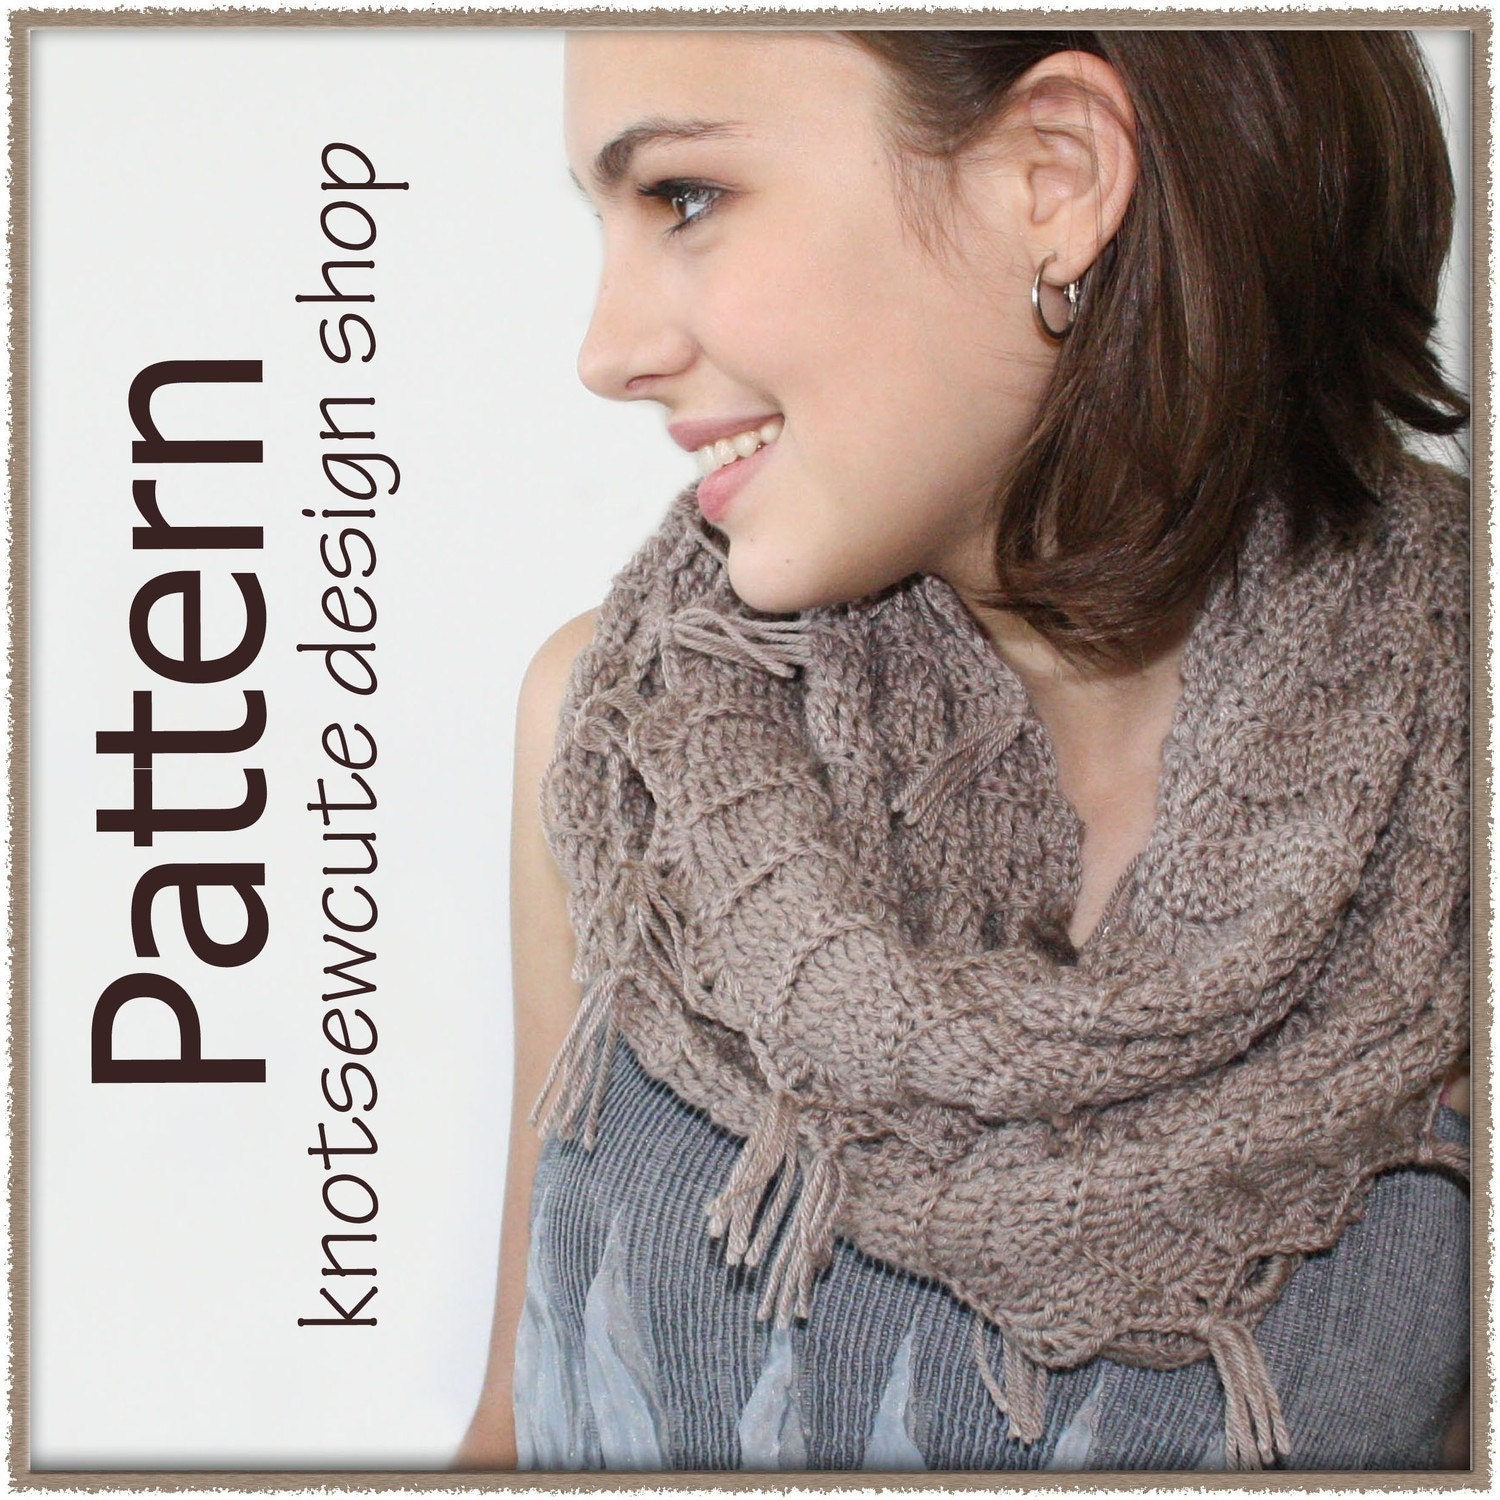 How to Find Free Knitting and Crocheted Cowls and Scarf Patterns